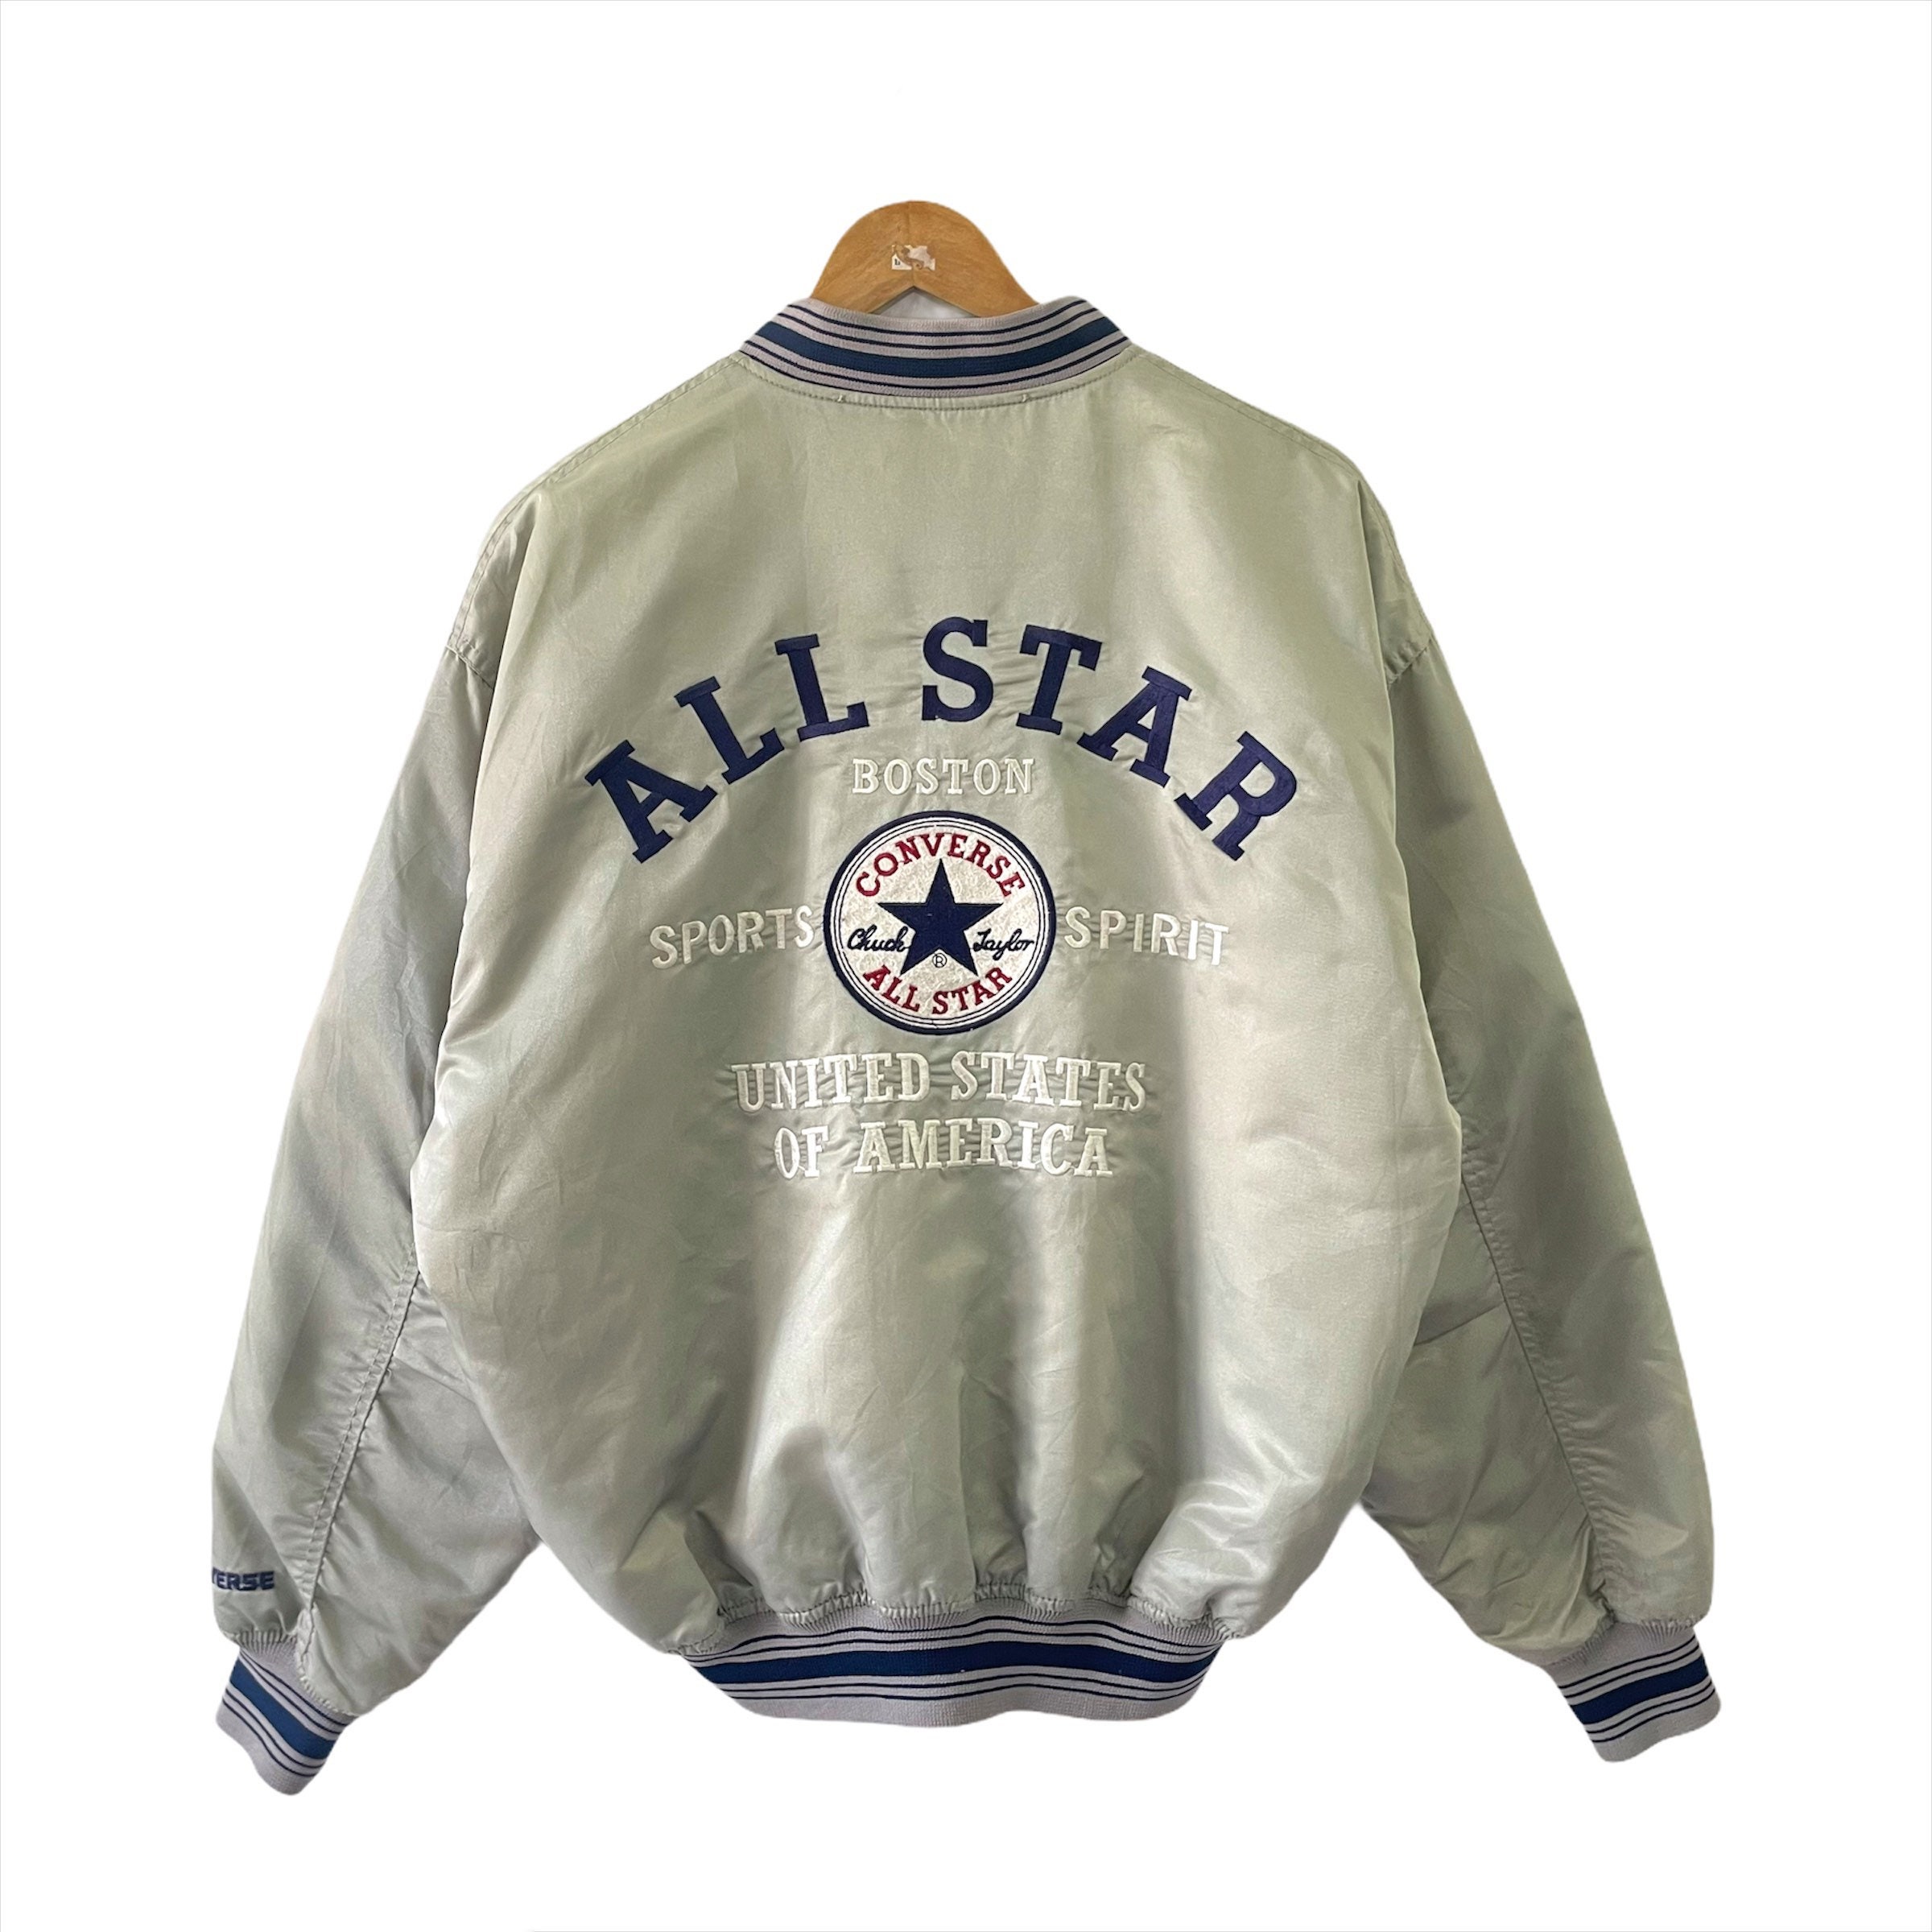 Top 50+ images converse canvas jacket - In.thptnganamst.edu.vn